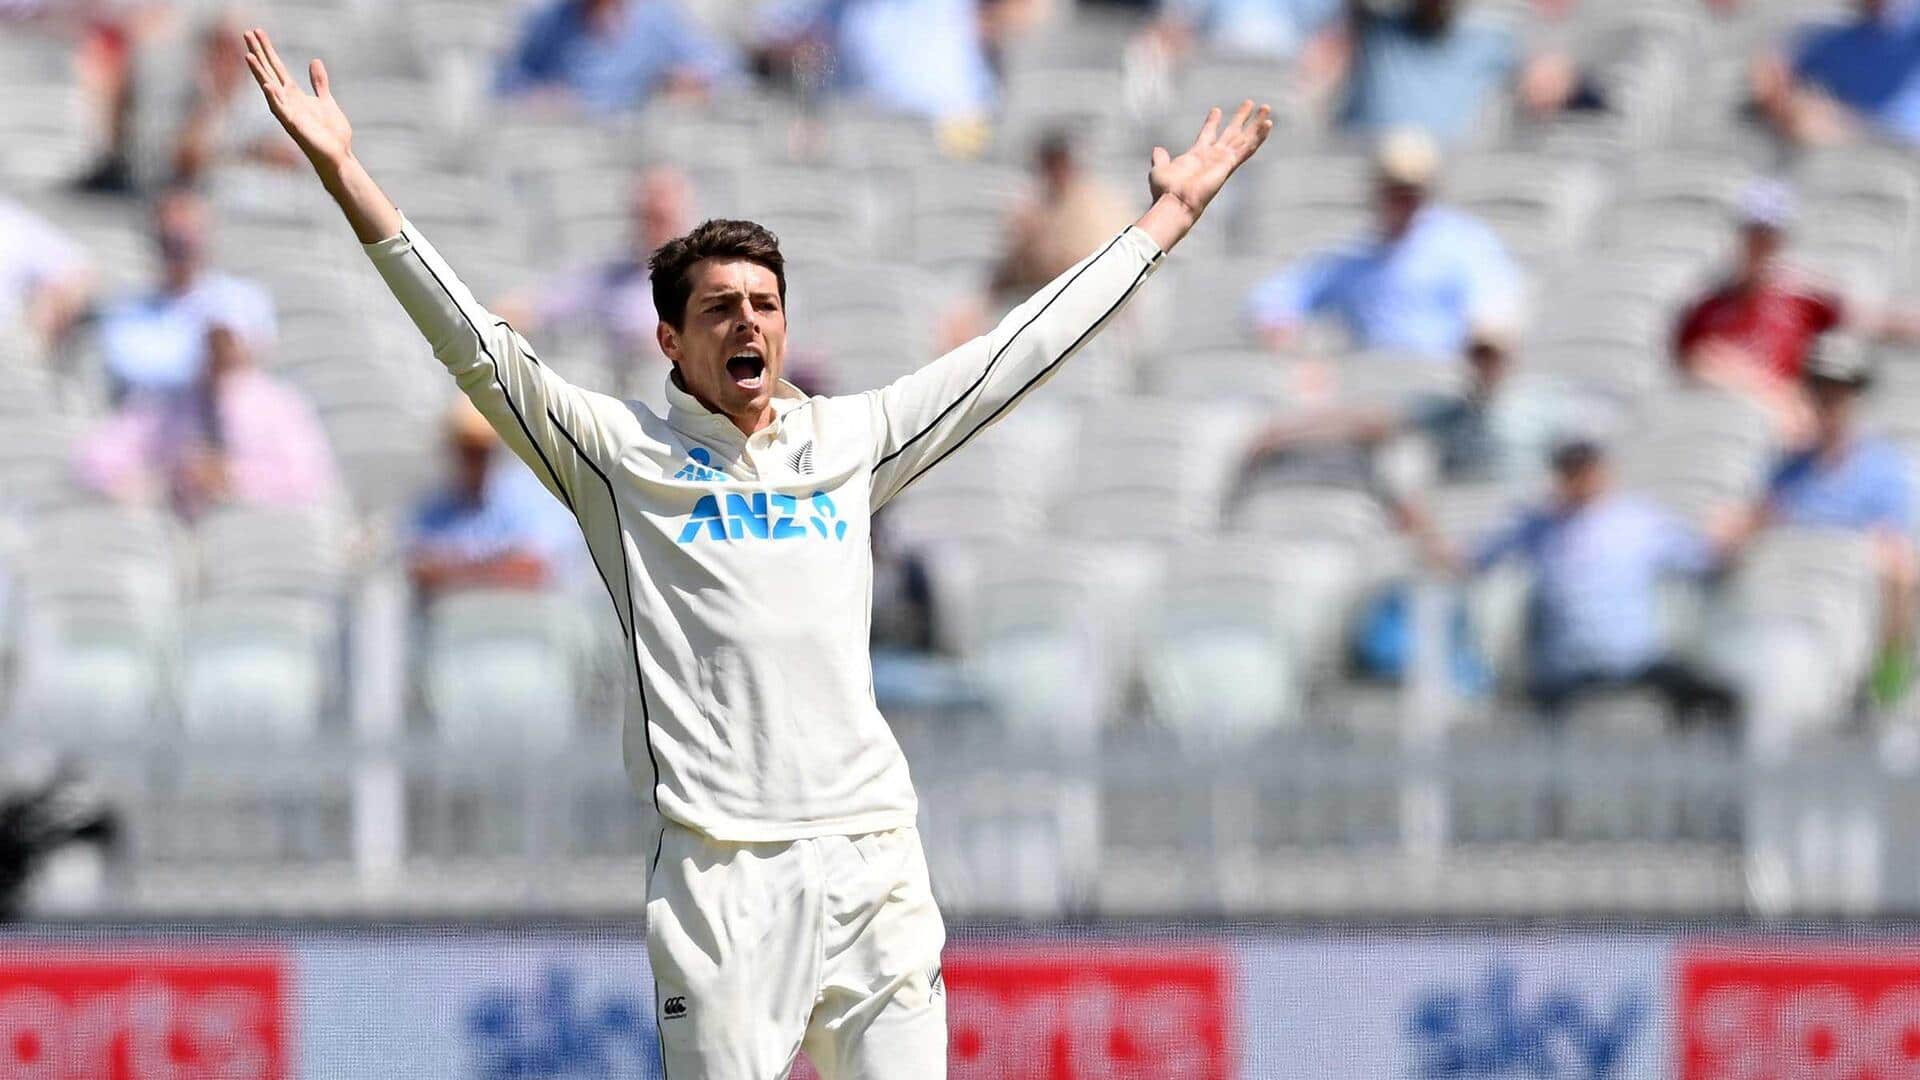 Mitchell Santner claims 3/34 versus SA, accomplishes 50 Test wickets